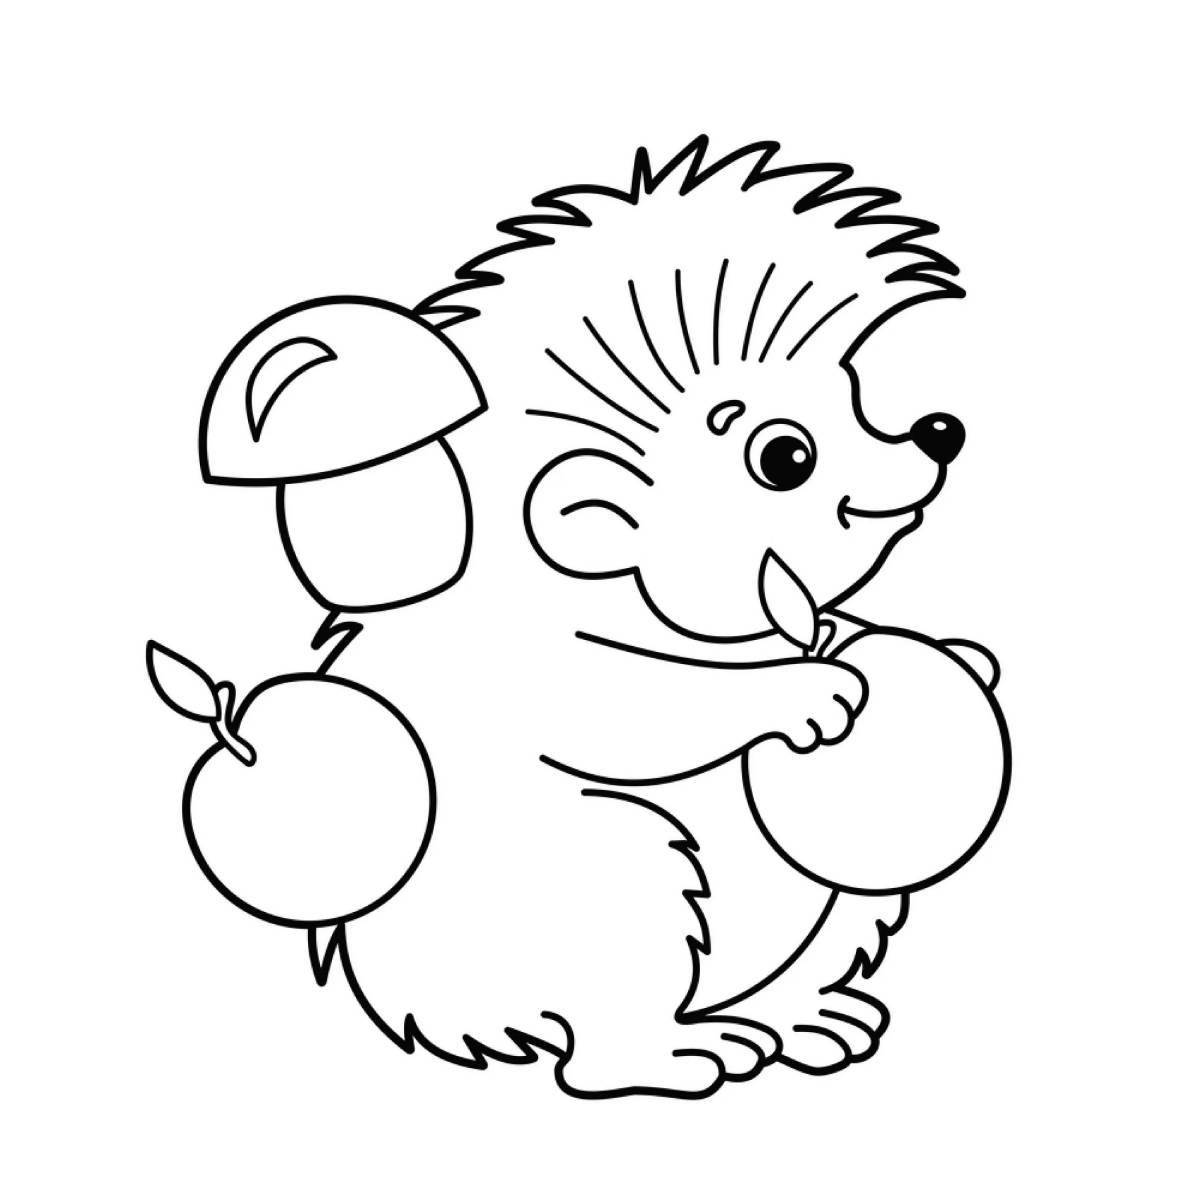 Cute and cuddly hedgehog coloring book